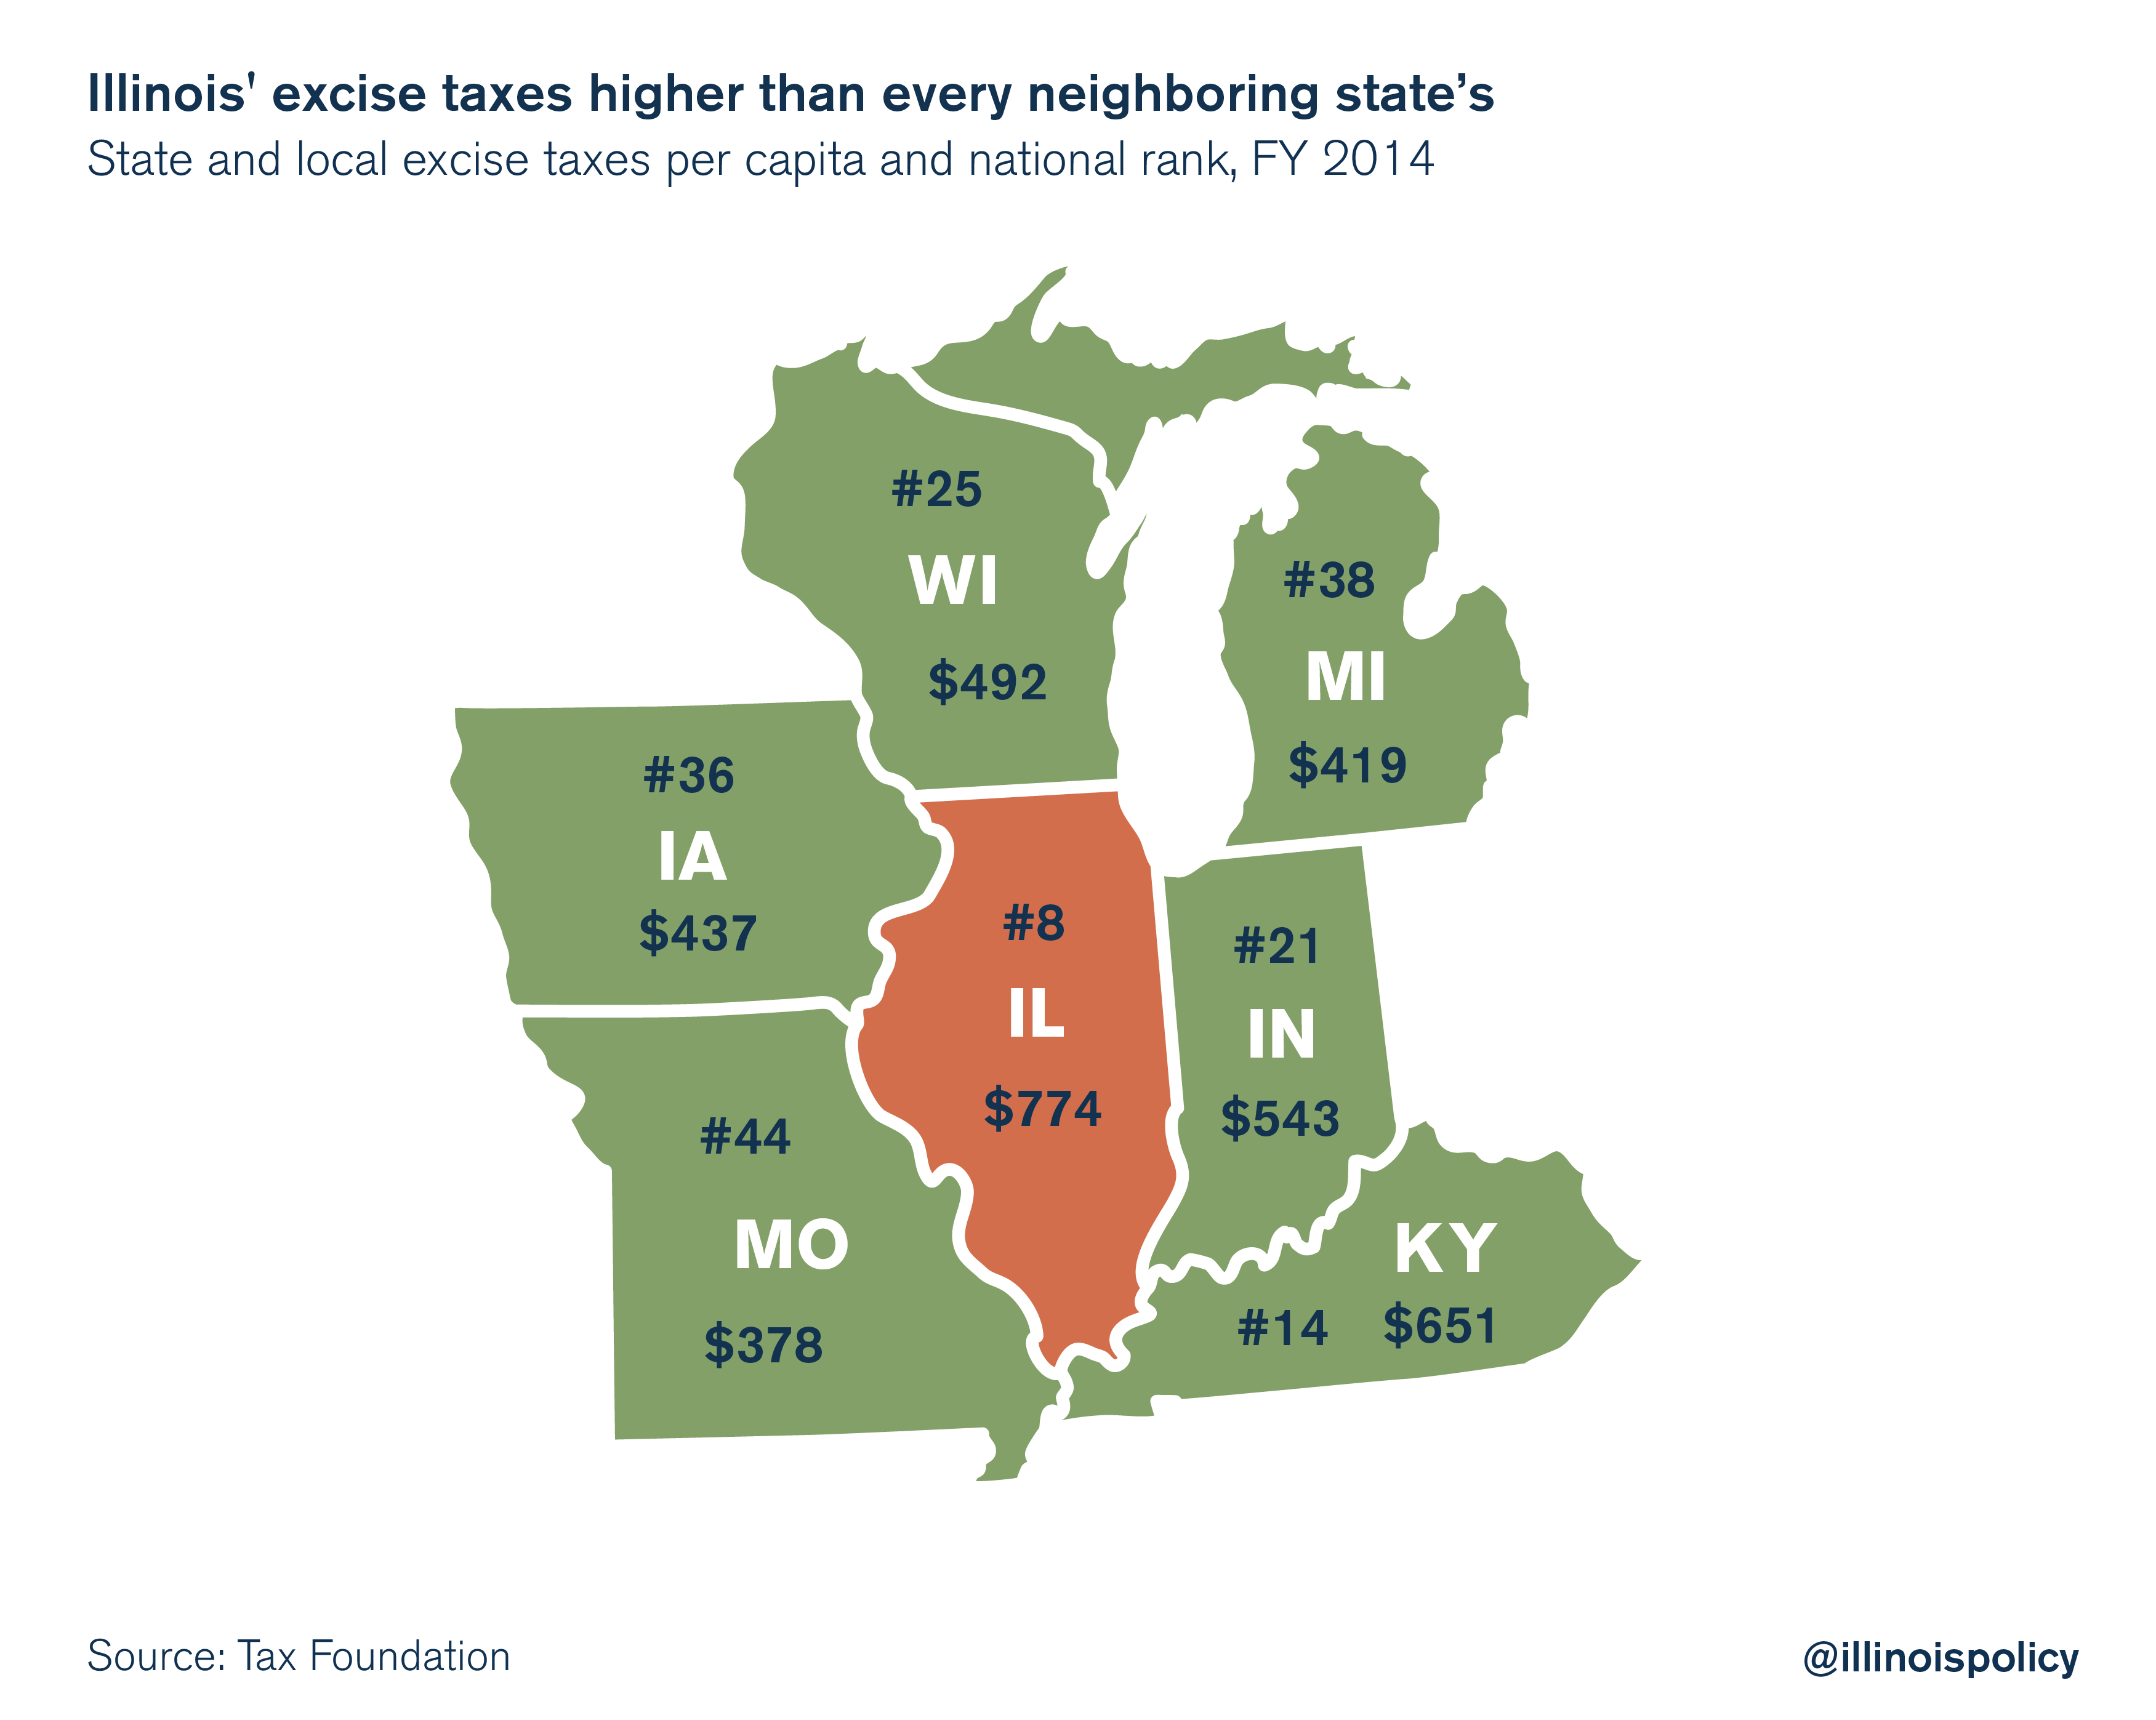 Illinois home to higher excise taxes than every neighboring state